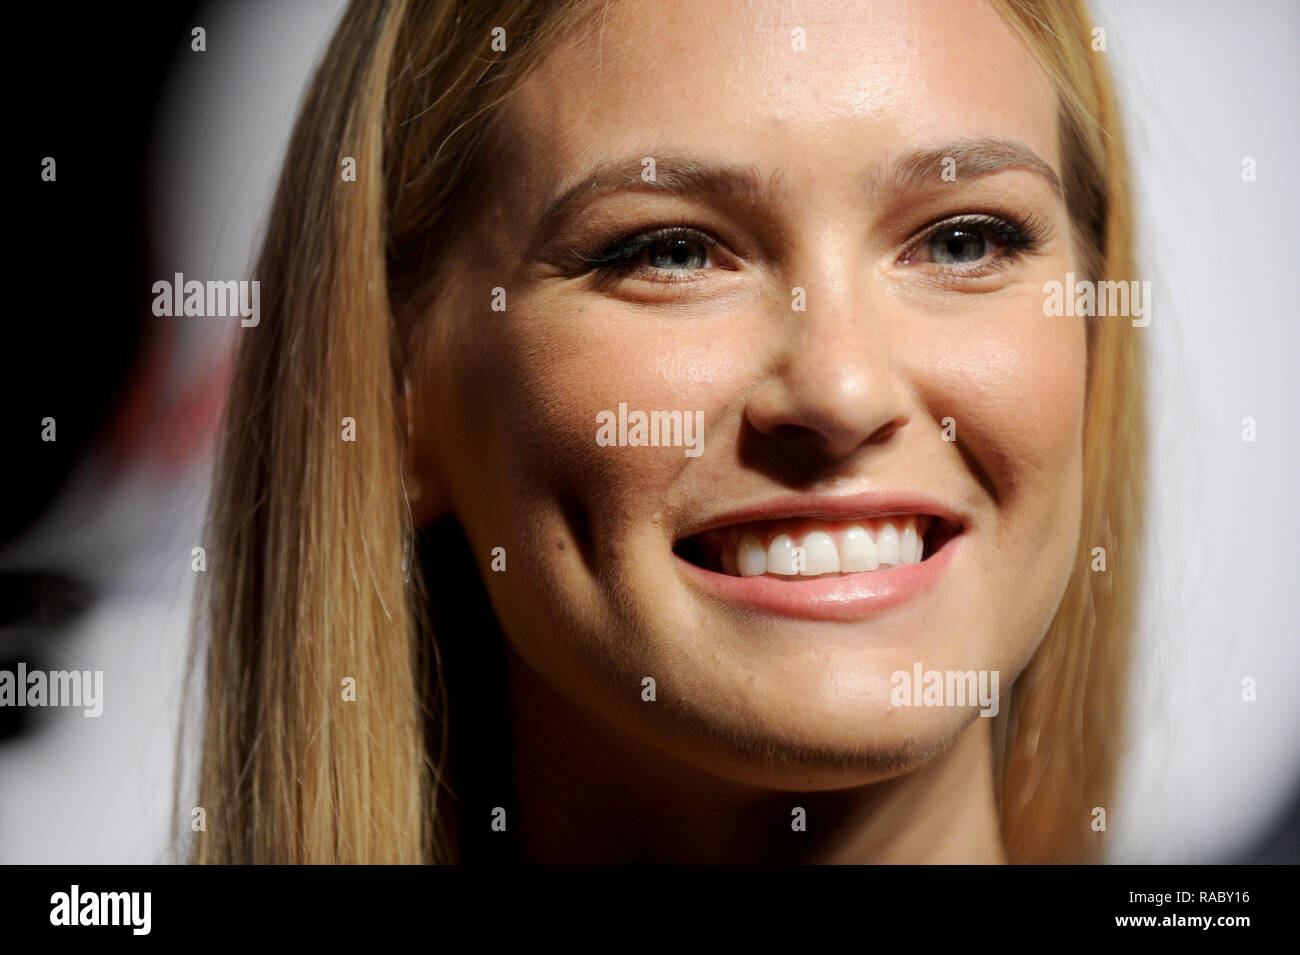 NEW YORK, NY - MAY 24: Bar Refaeli attends the Maxim Hot 100 party at Dream Downtown on May 24, 2012 in New York City.  People:  Bar Refaeli Stock Photo